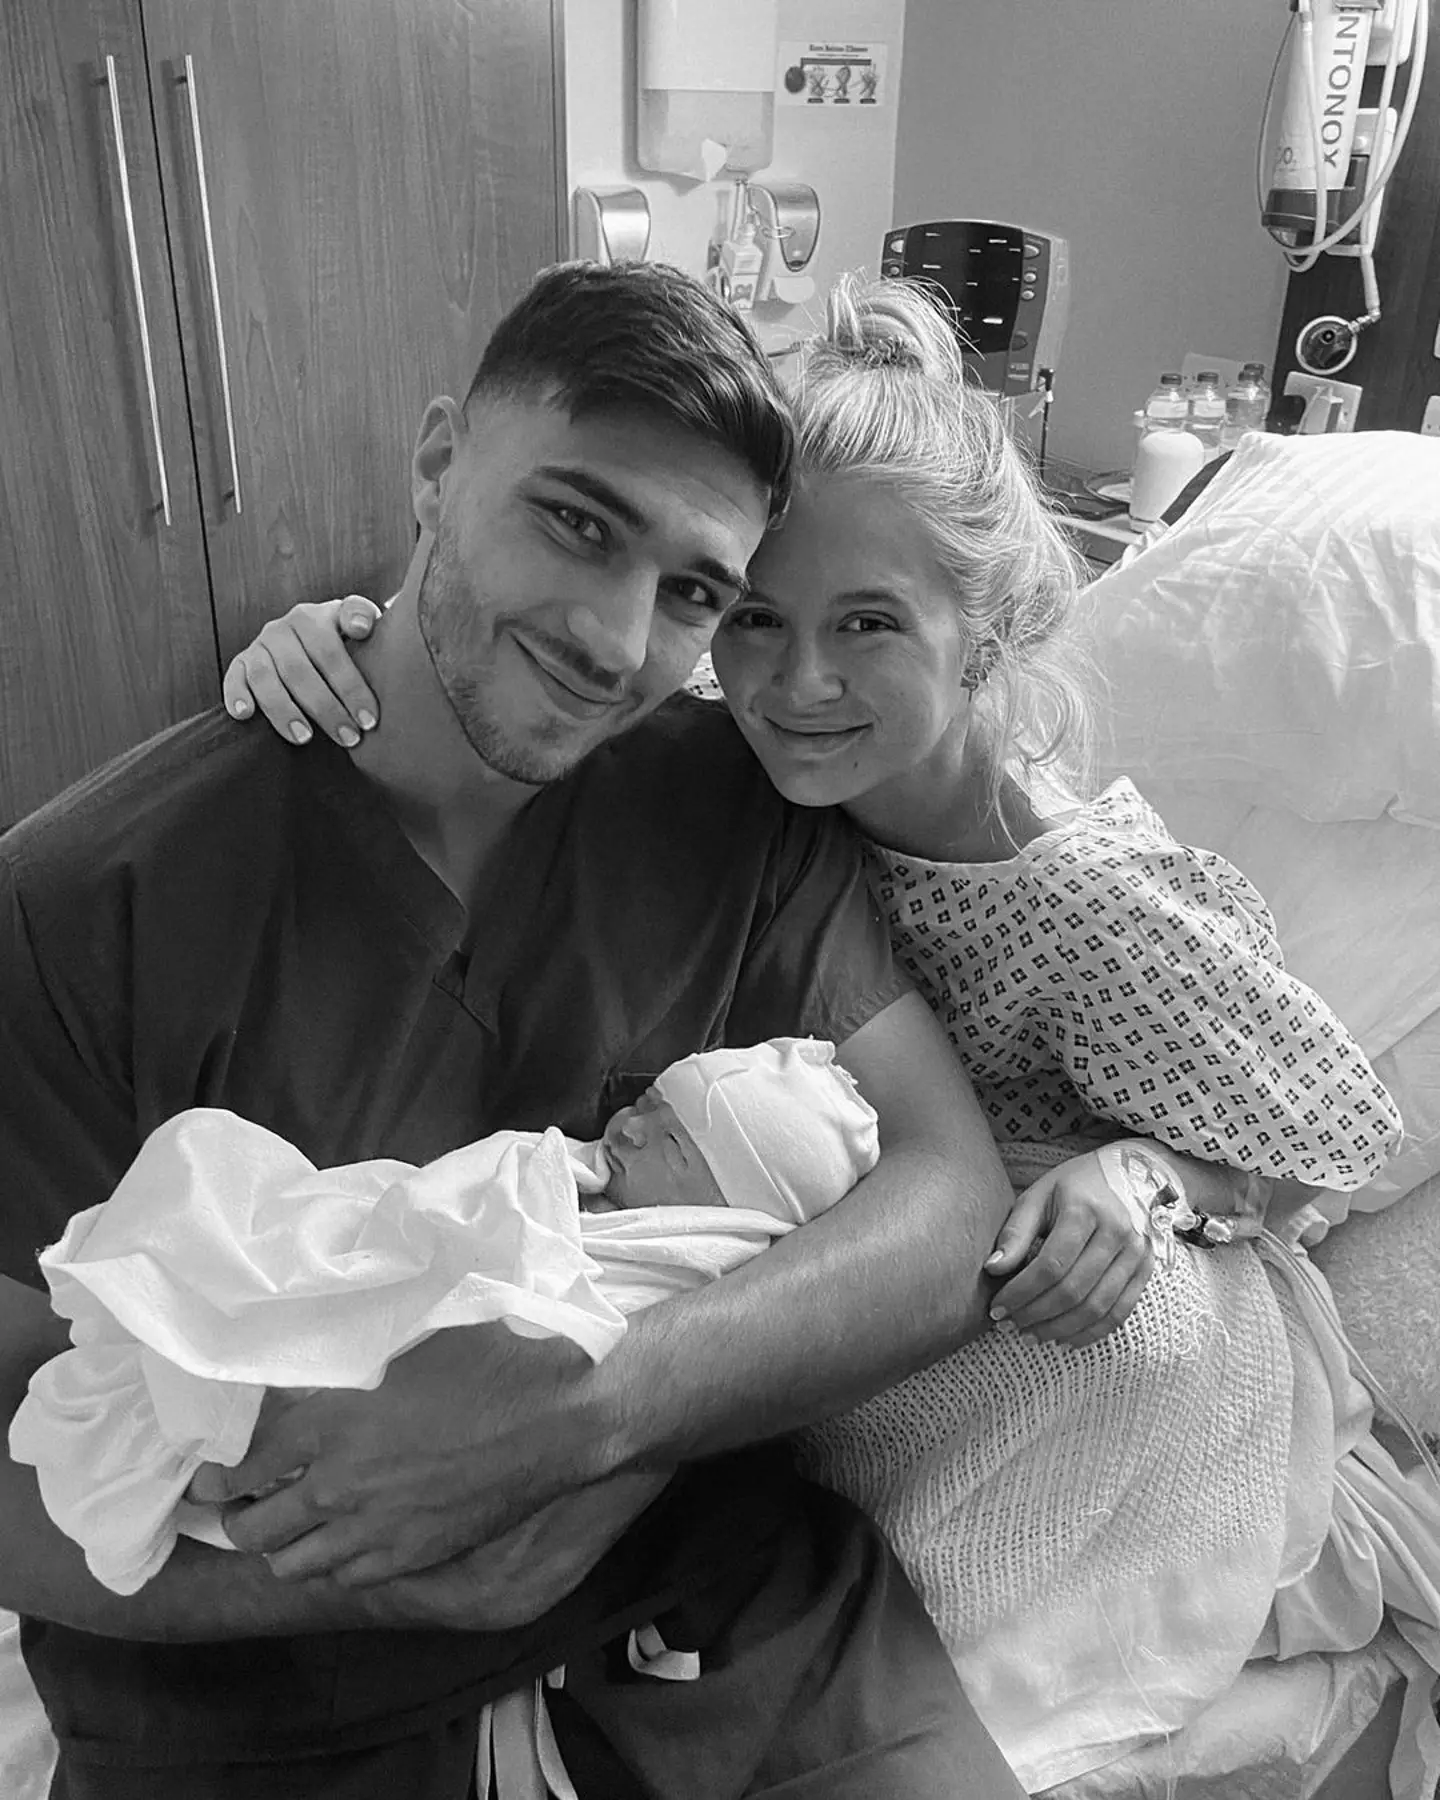 The couple are overjoyed with their baby girl.